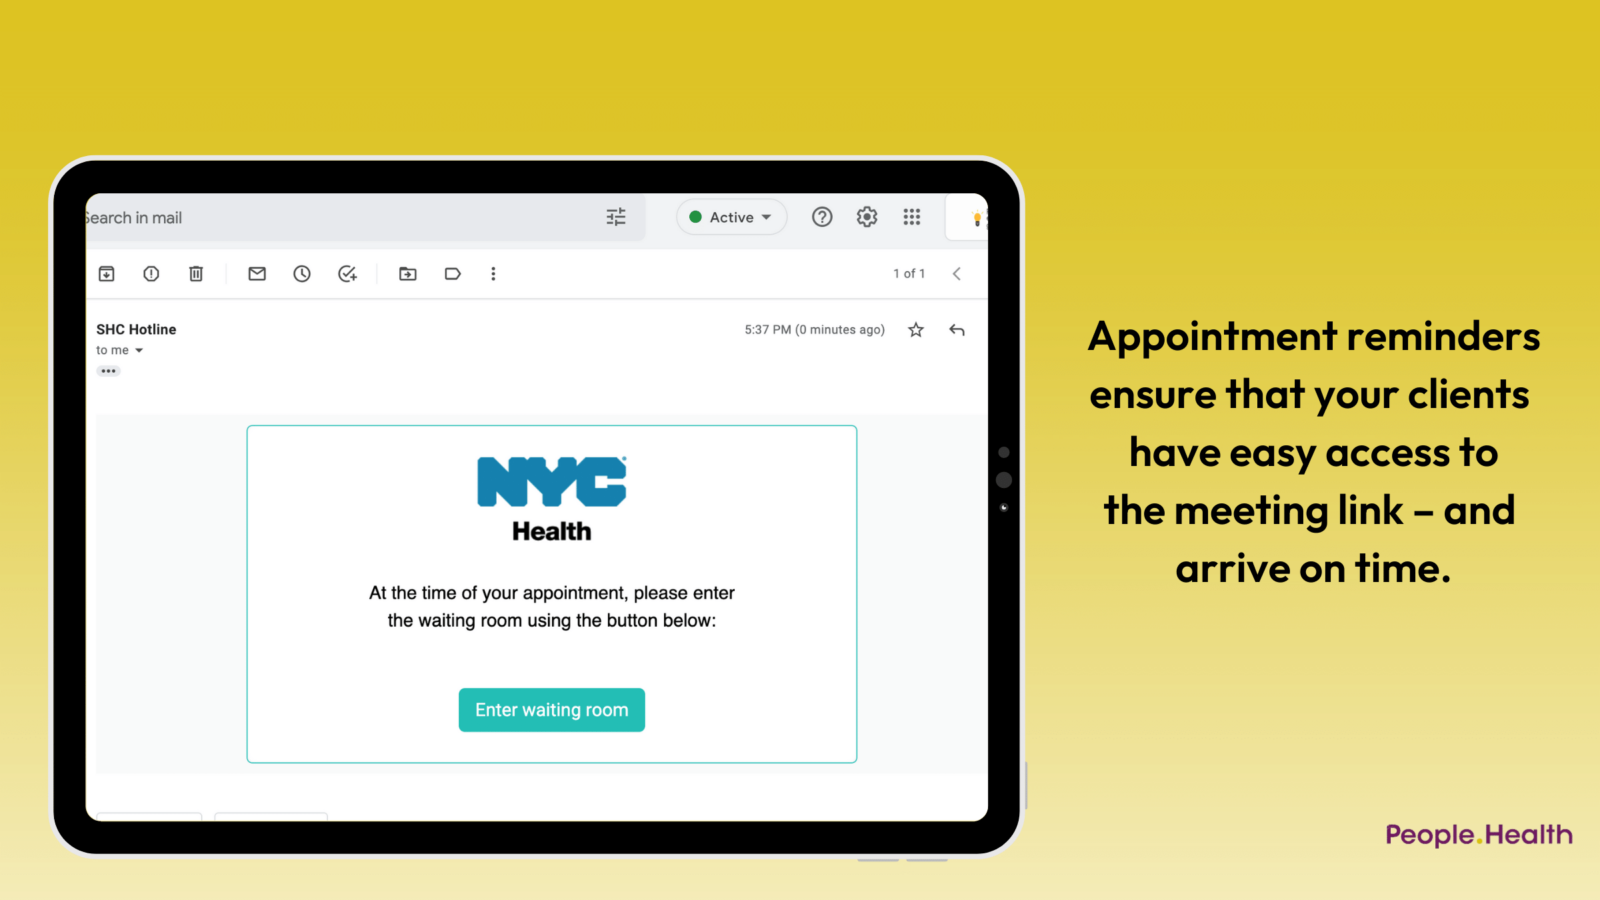 Appointment reminders ensure that your clients have easy access to the meeting link – and arrive on time.